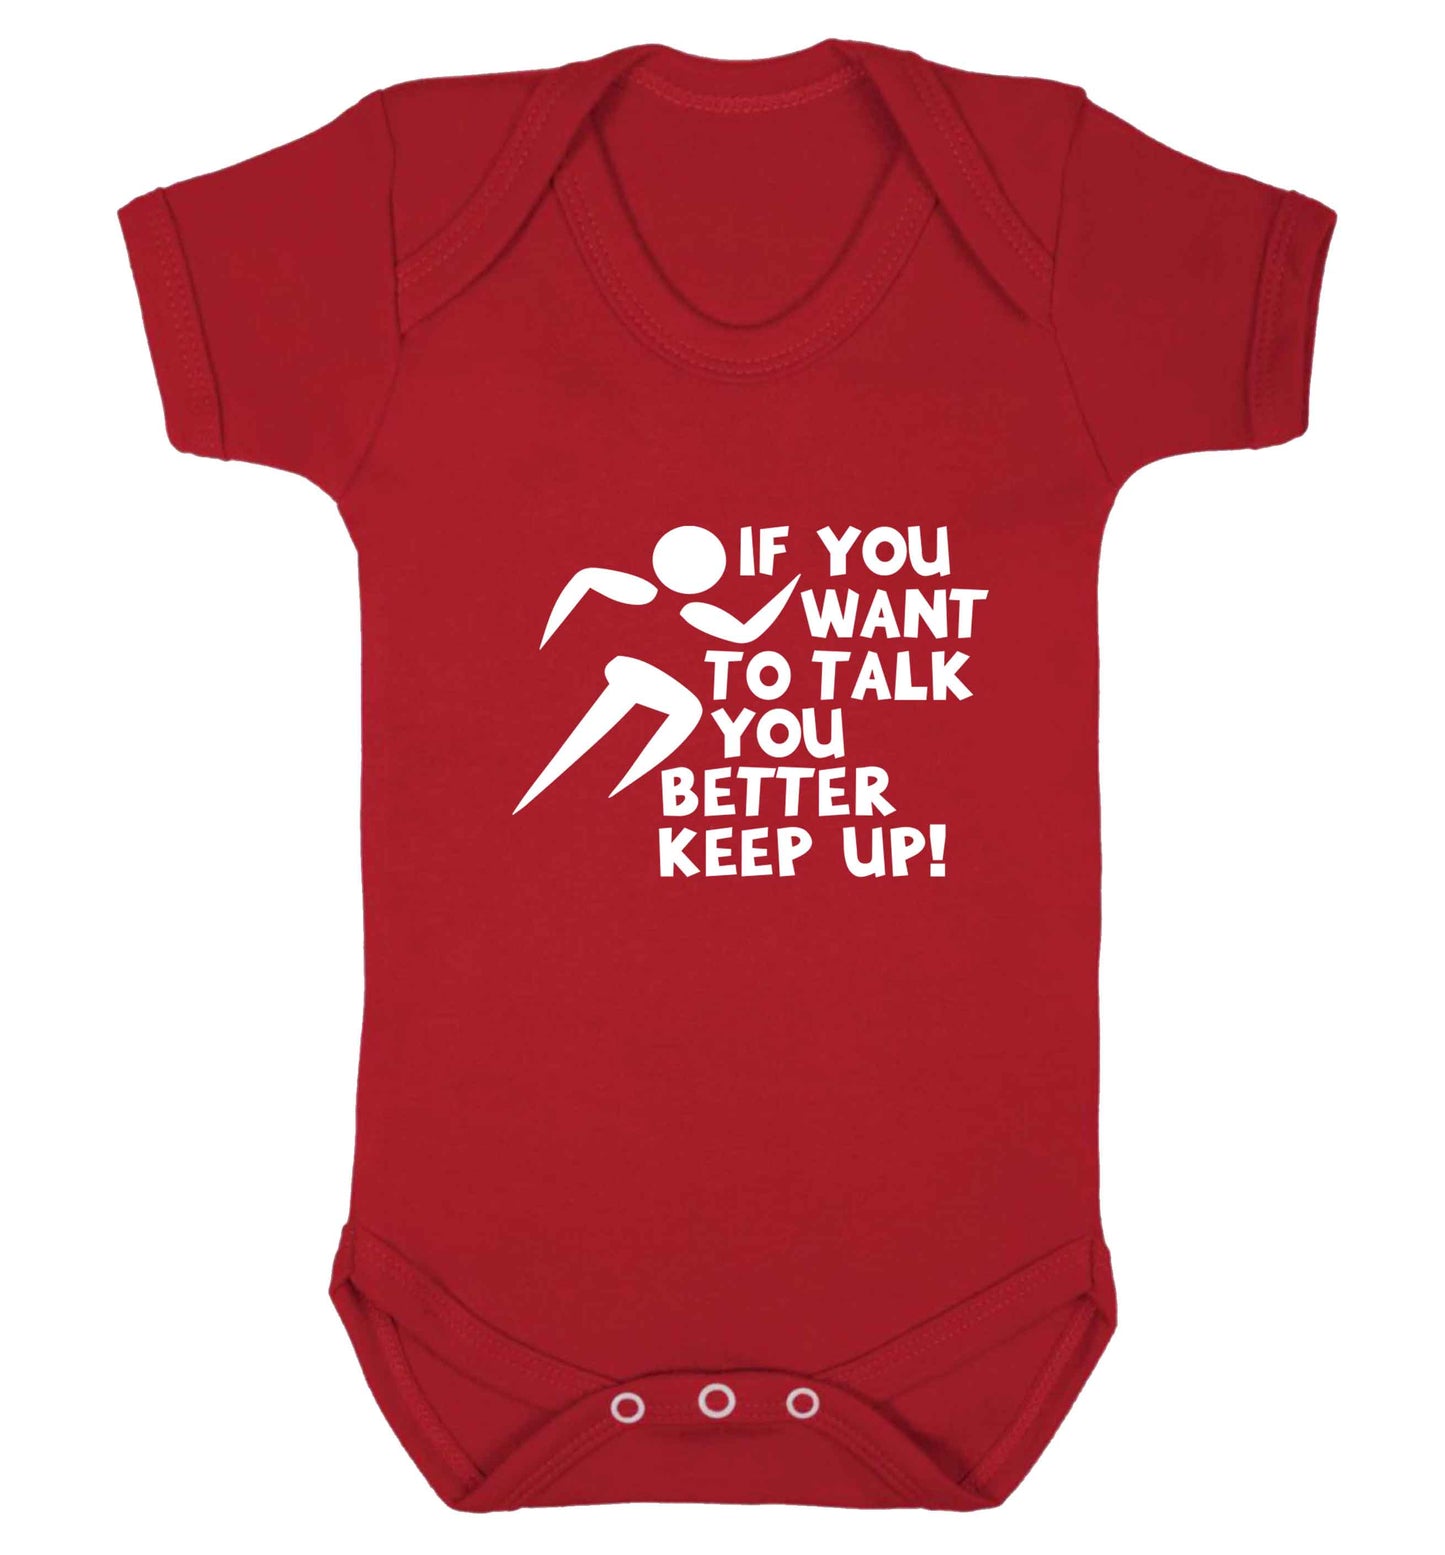 If you want to talk you better keep up! baby vest red 18-24 months